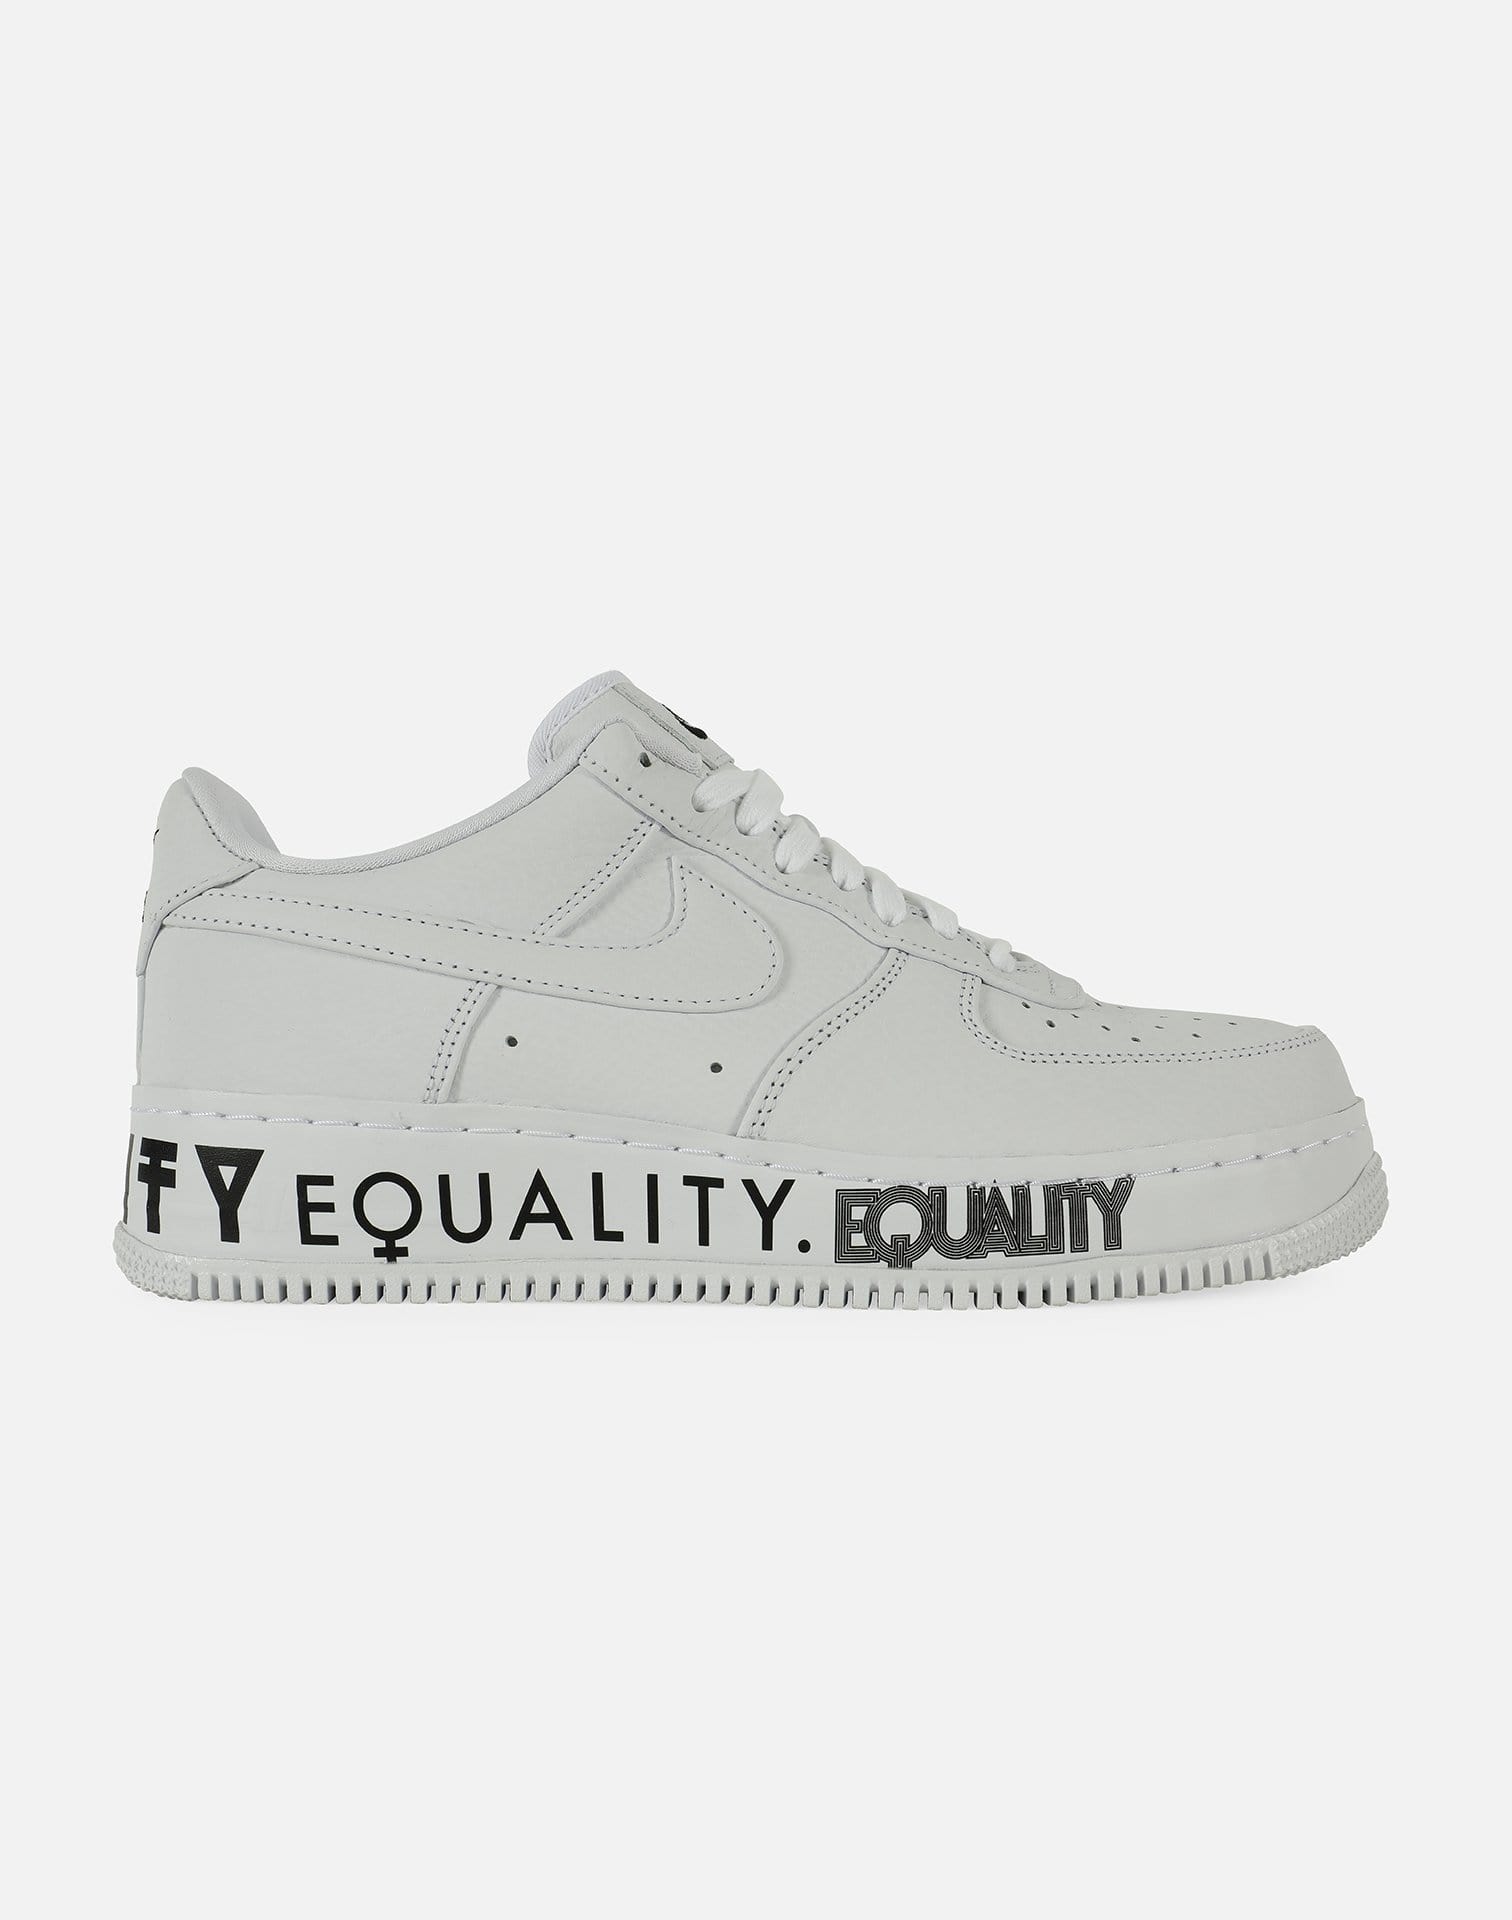 Nike Men's Air Force 1 Low QS 'Equality'